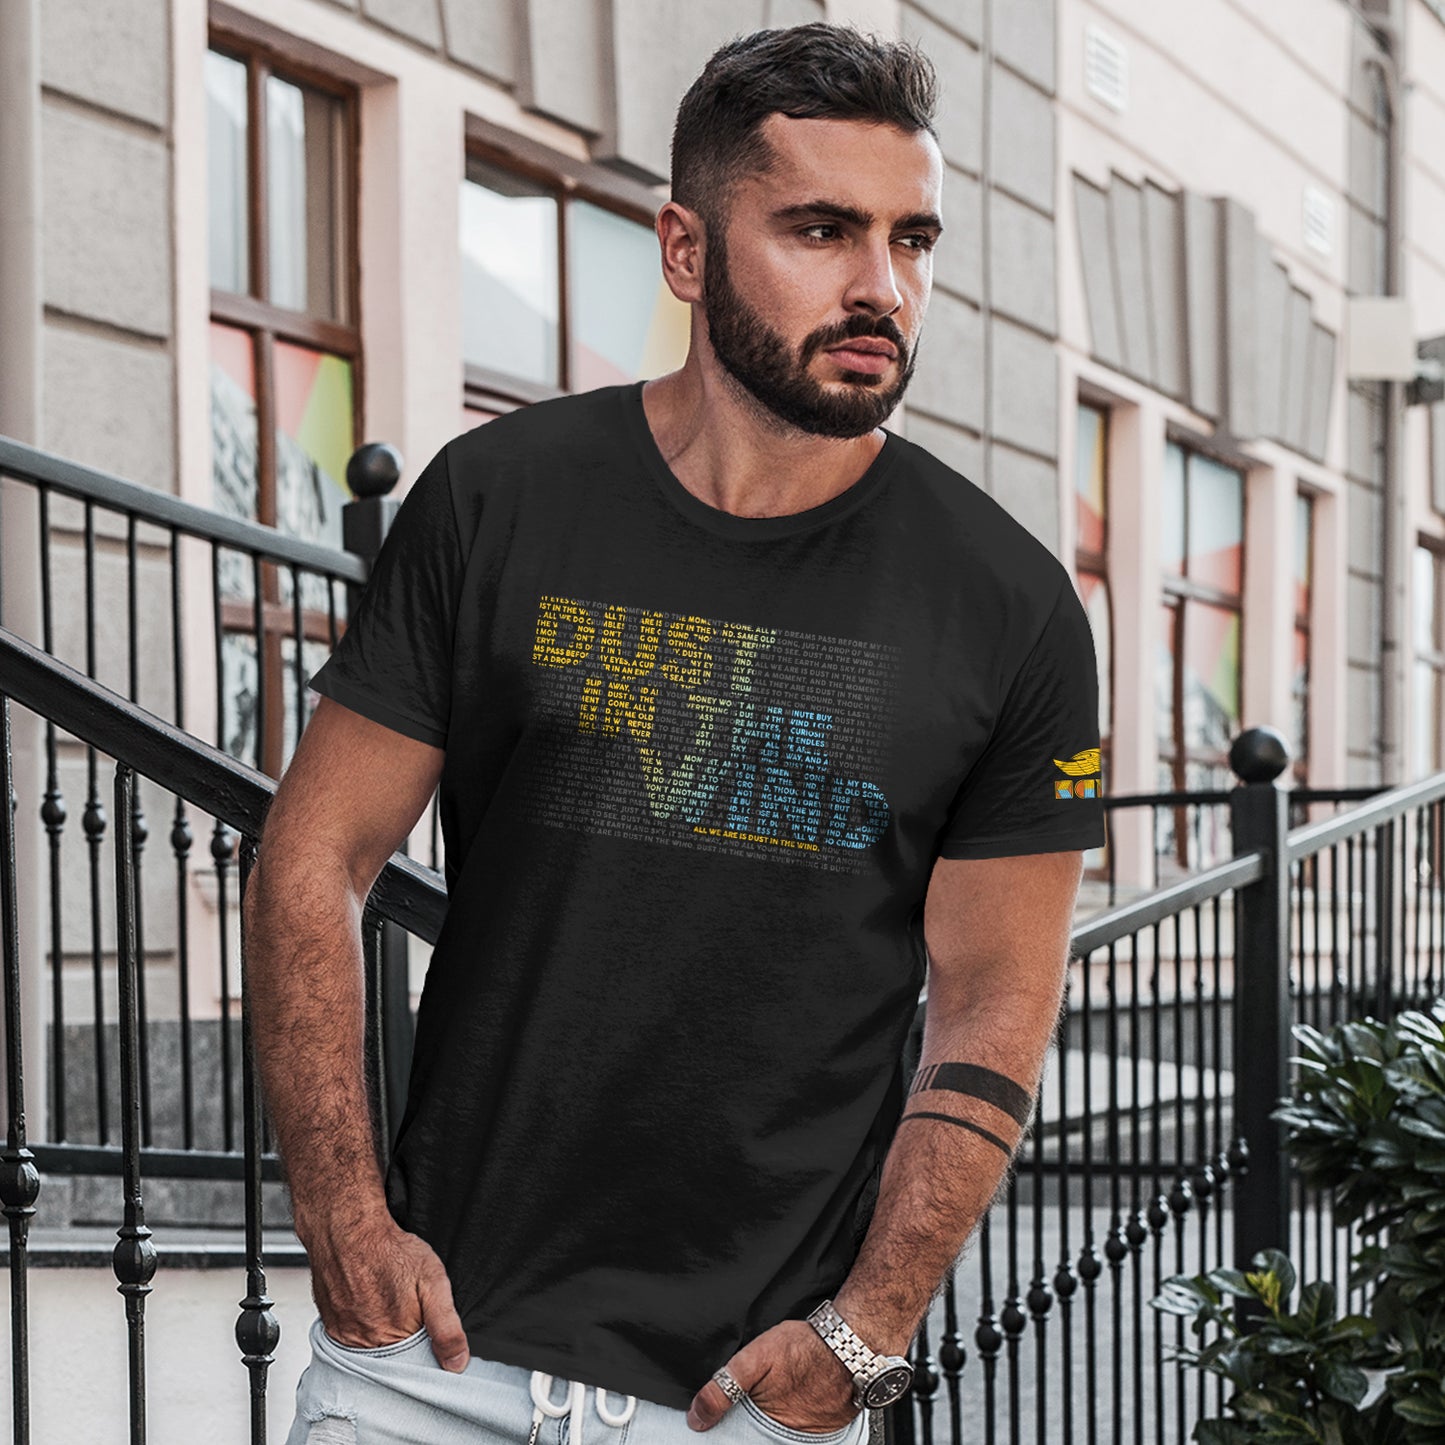 A male model wearing a black t-shirt standing in front of a grey building. On the front of the shirt is text saying "dust in the wind." The text is comprised of smaller text, colored yellow and blue, to form the dust in the wind phrase. On the left sleeve is the logo of the band Kansas.